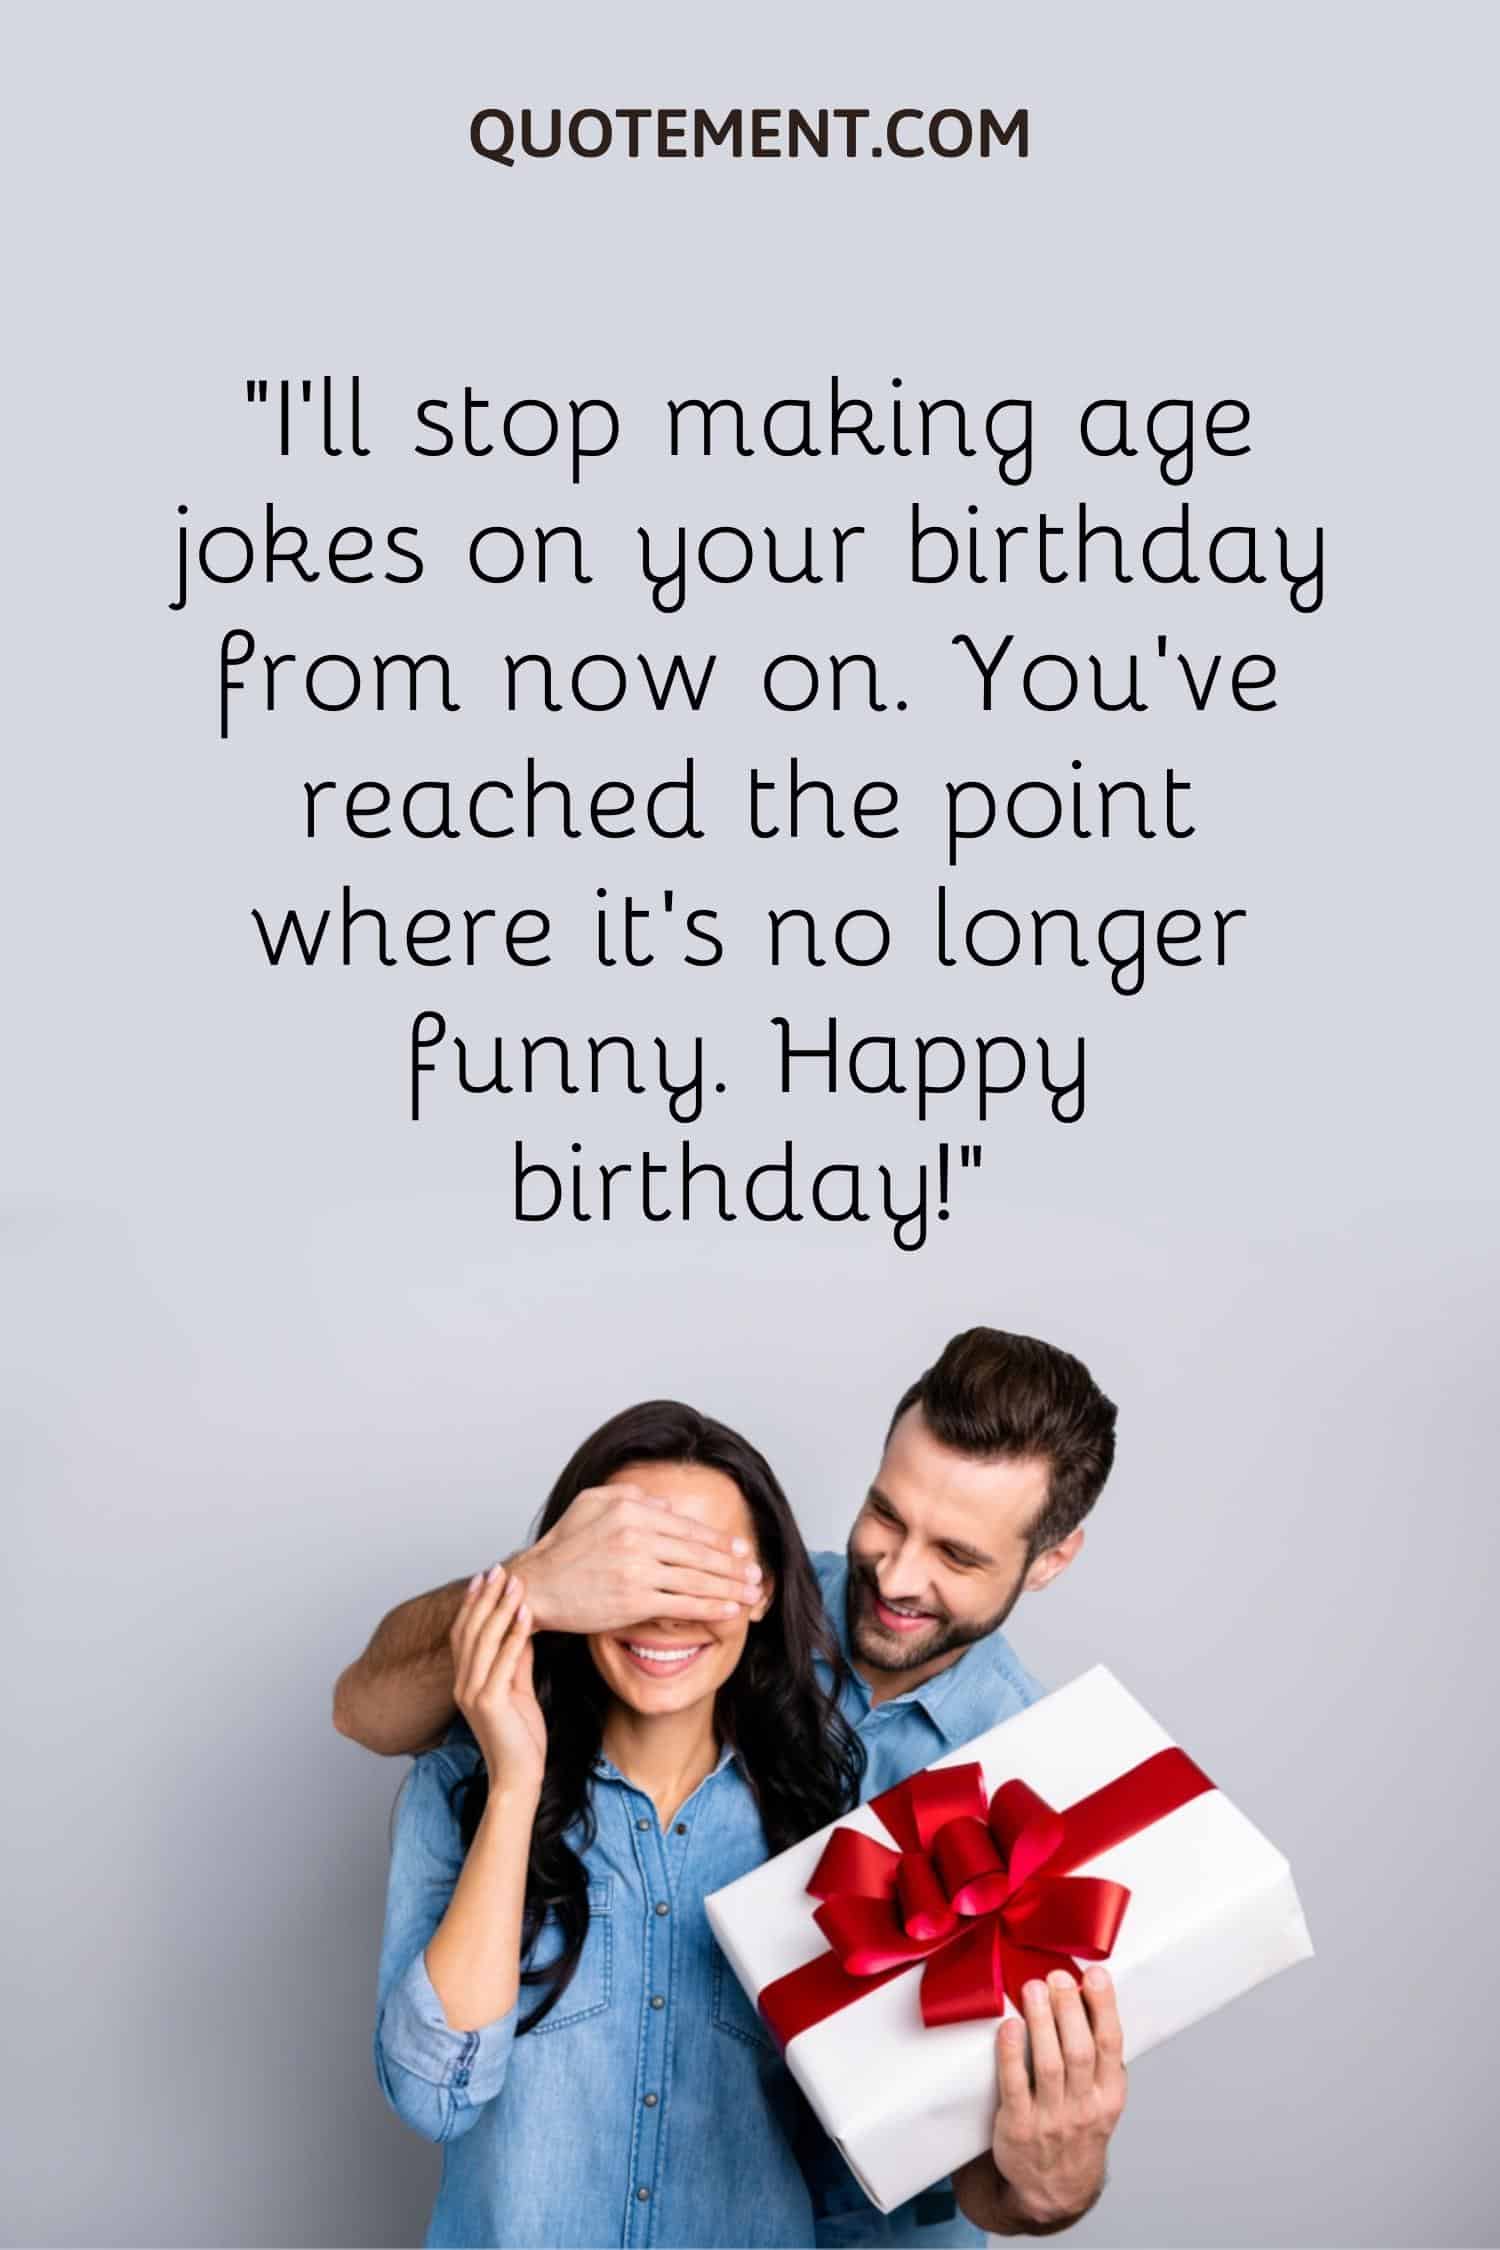 I'll stop making age jokes on your birthday from now on